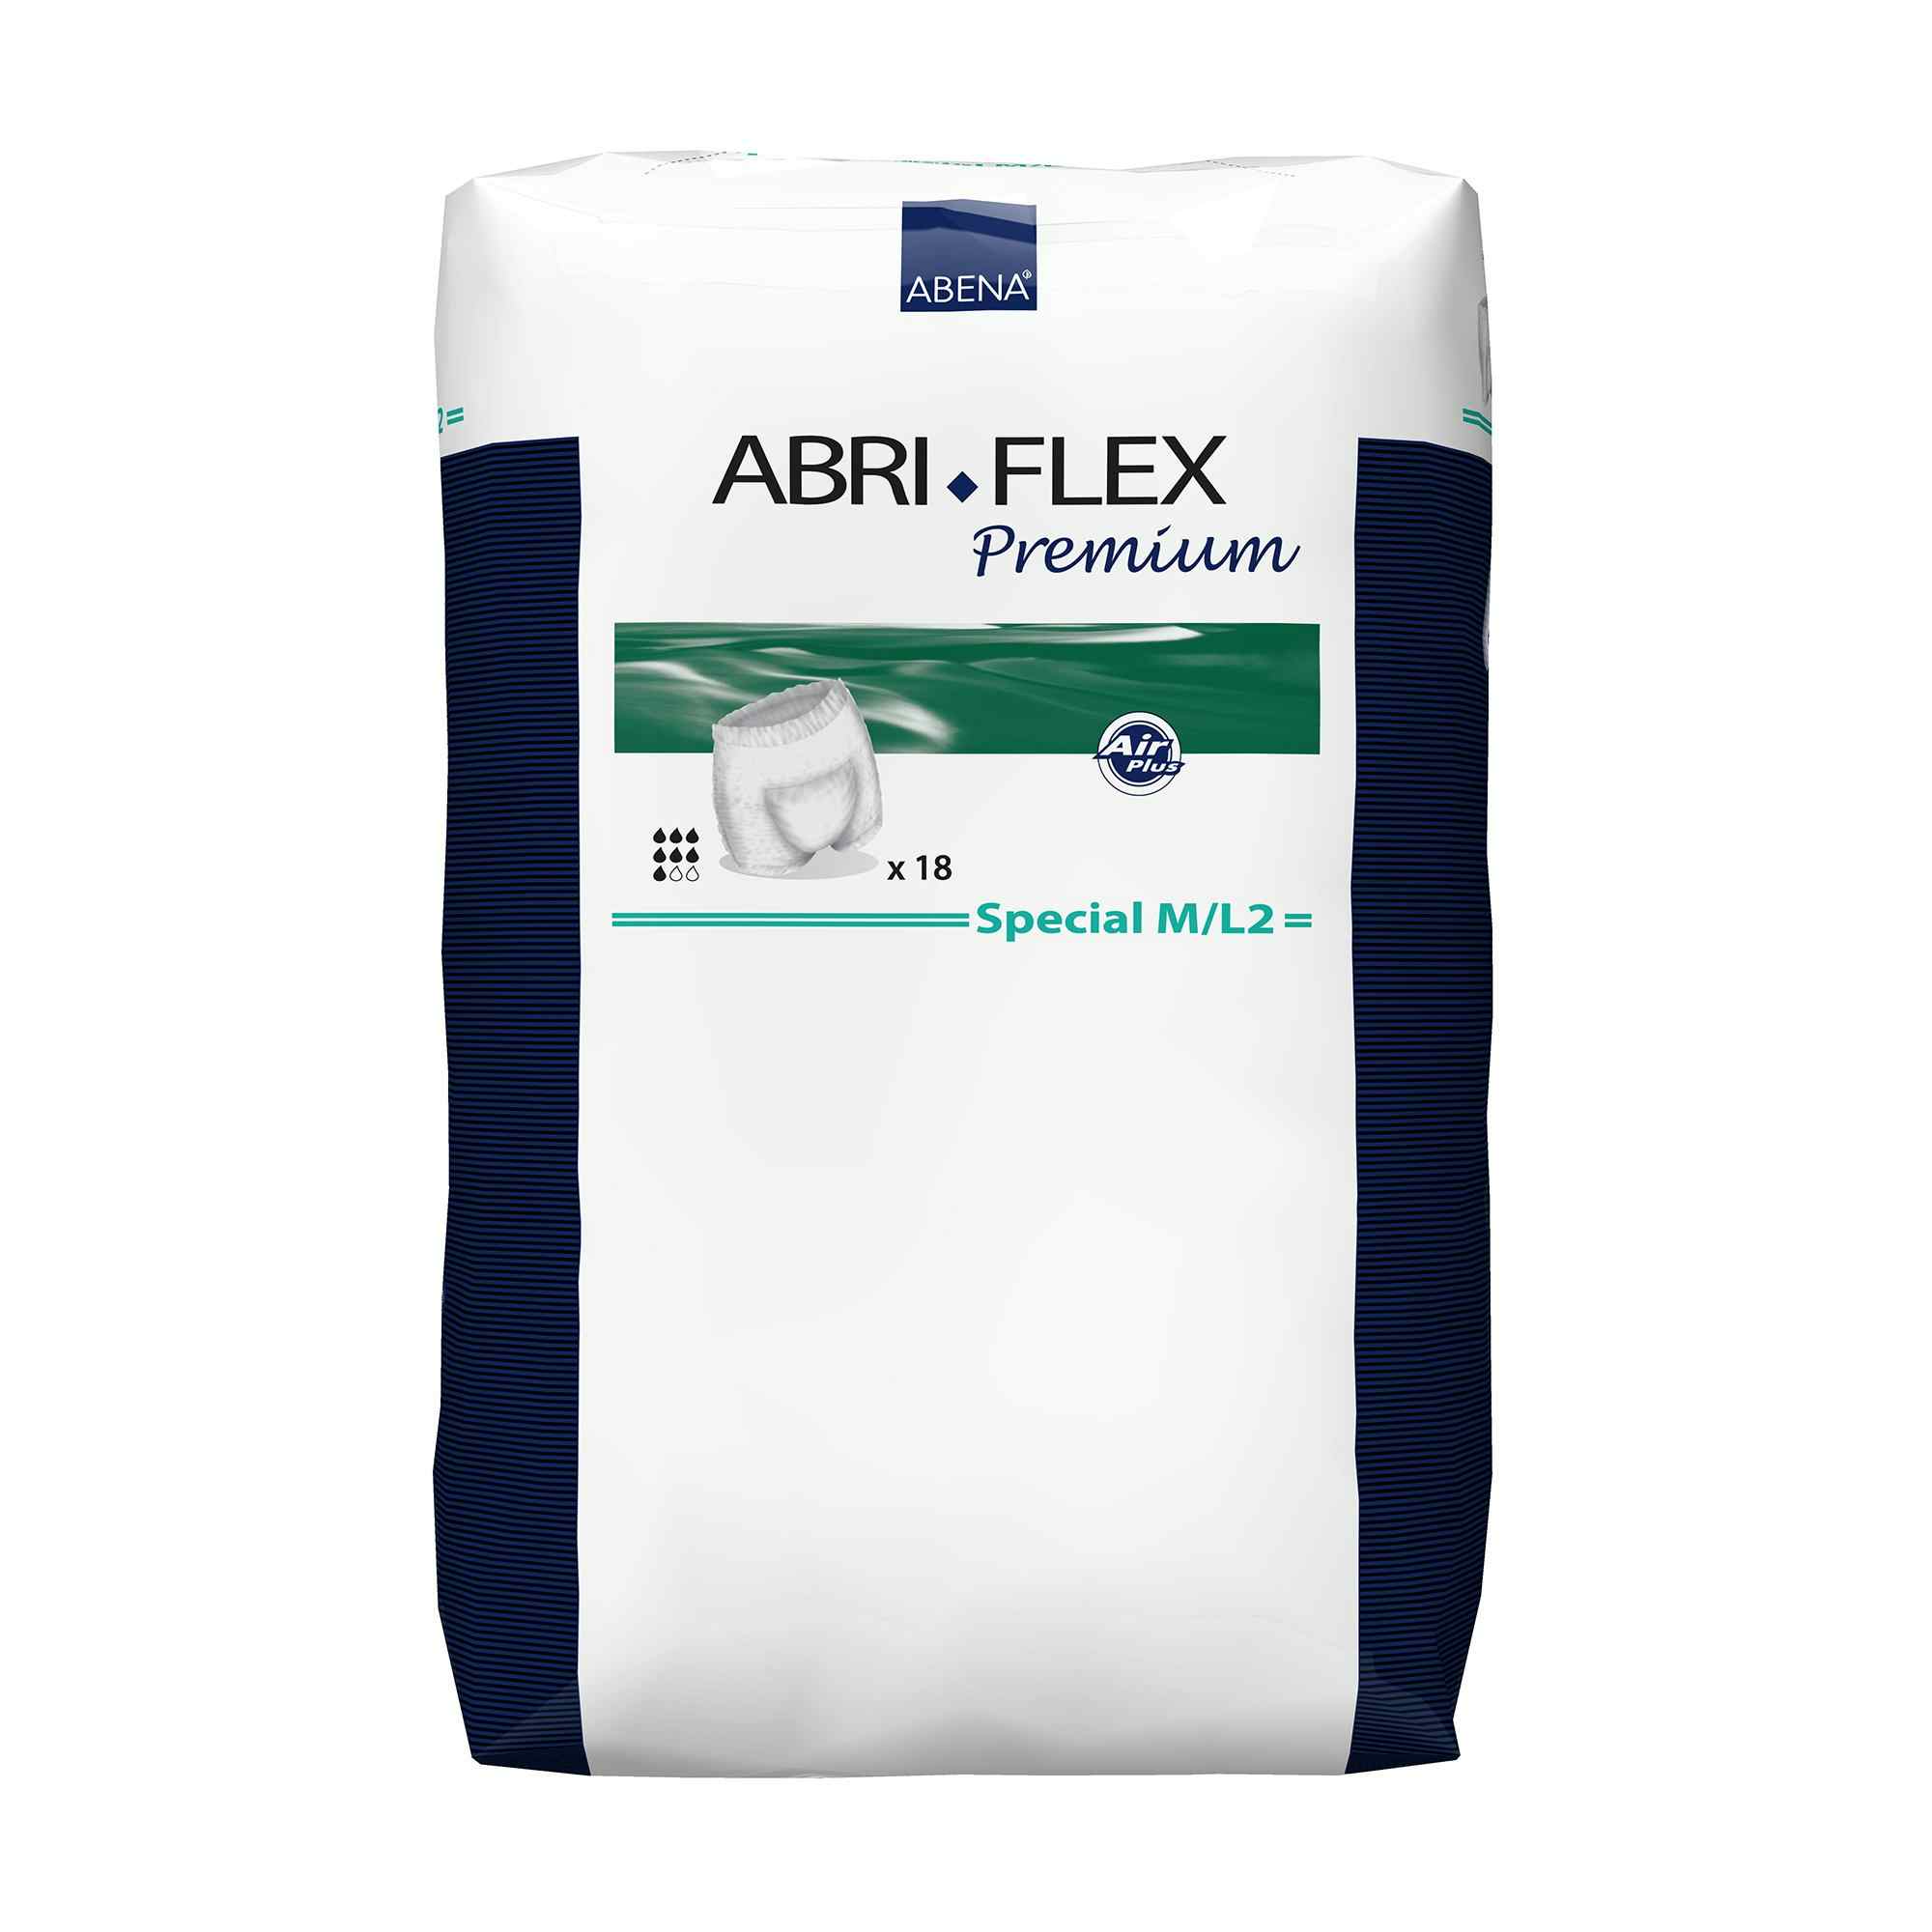 Abri-Flex Special Unisex Adult  Disposable Pull On Diaper with Tear Away Seams, Moderate Absorbency, 41076, Medium/Large  (32-53") - Case of 108 (6 Bags)